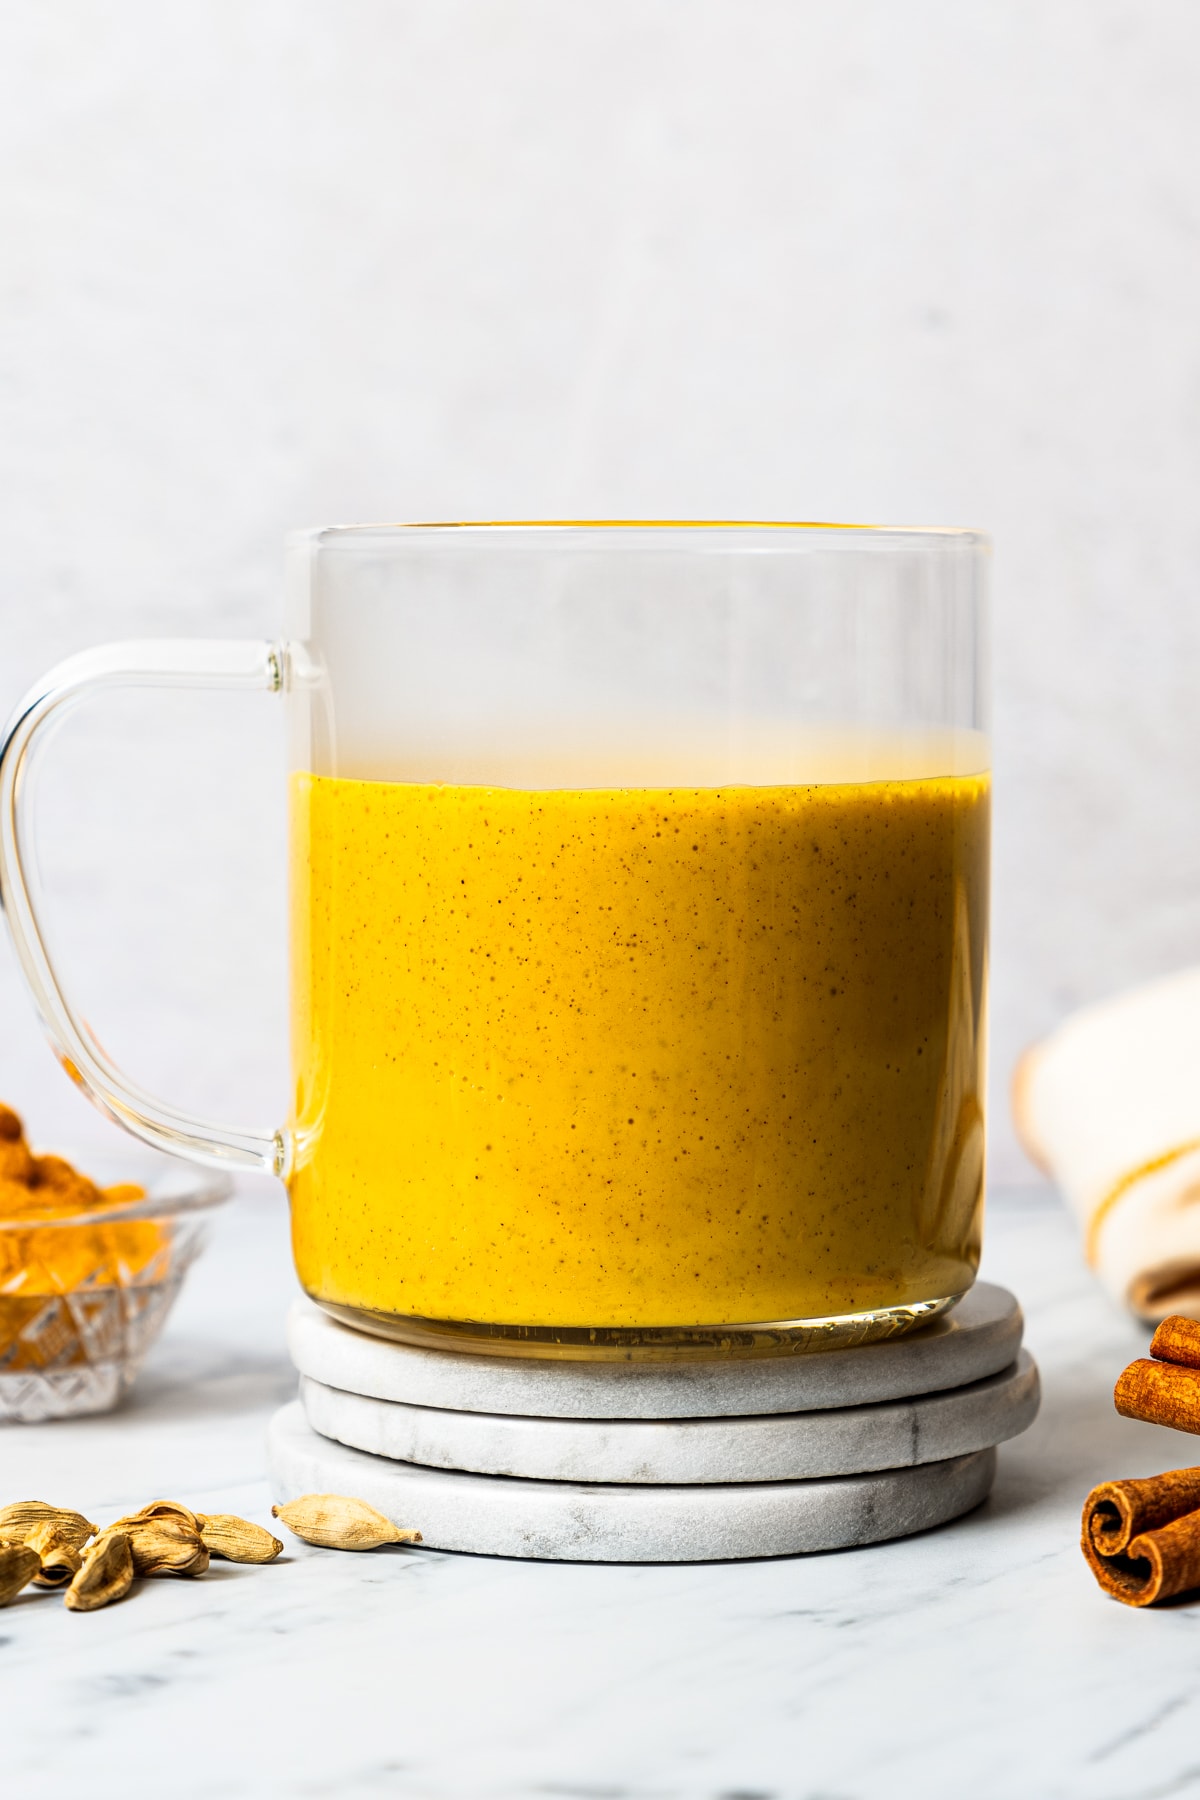 Close-up of a glass mug filled with turmeric latte near a bowl of turmeric and other whole spices.